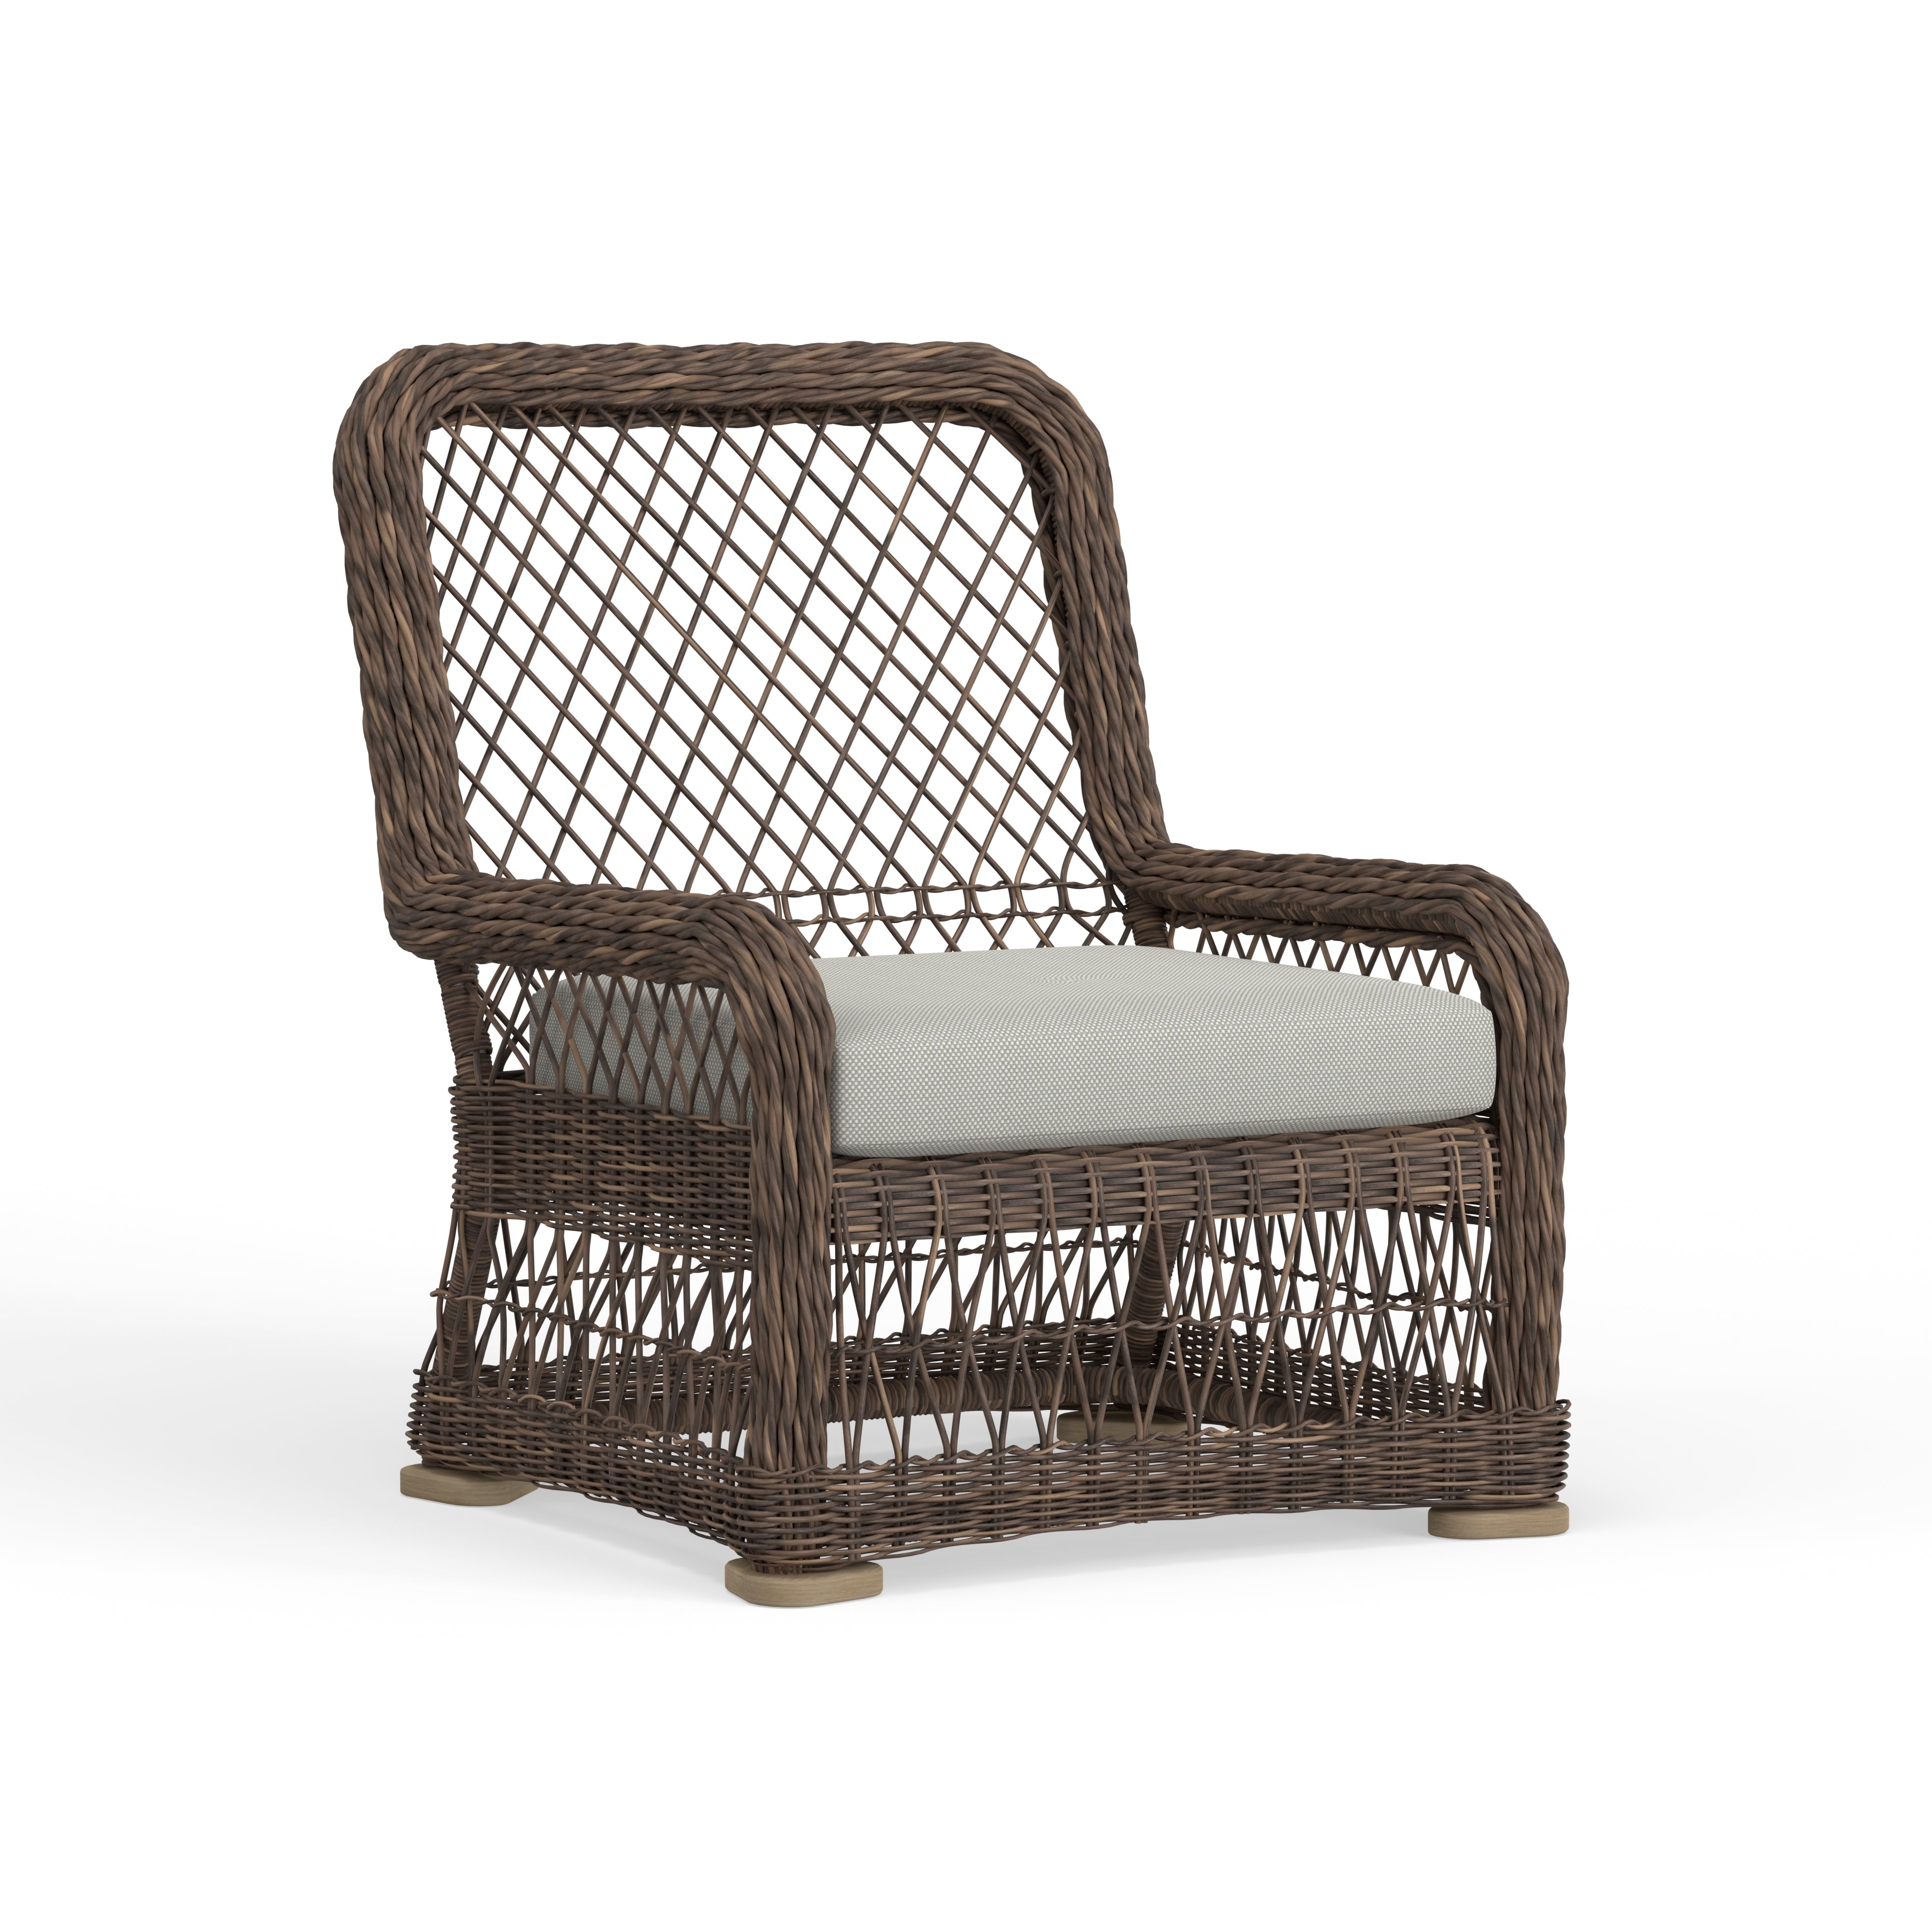 Best Wicker Chair For Front Porch